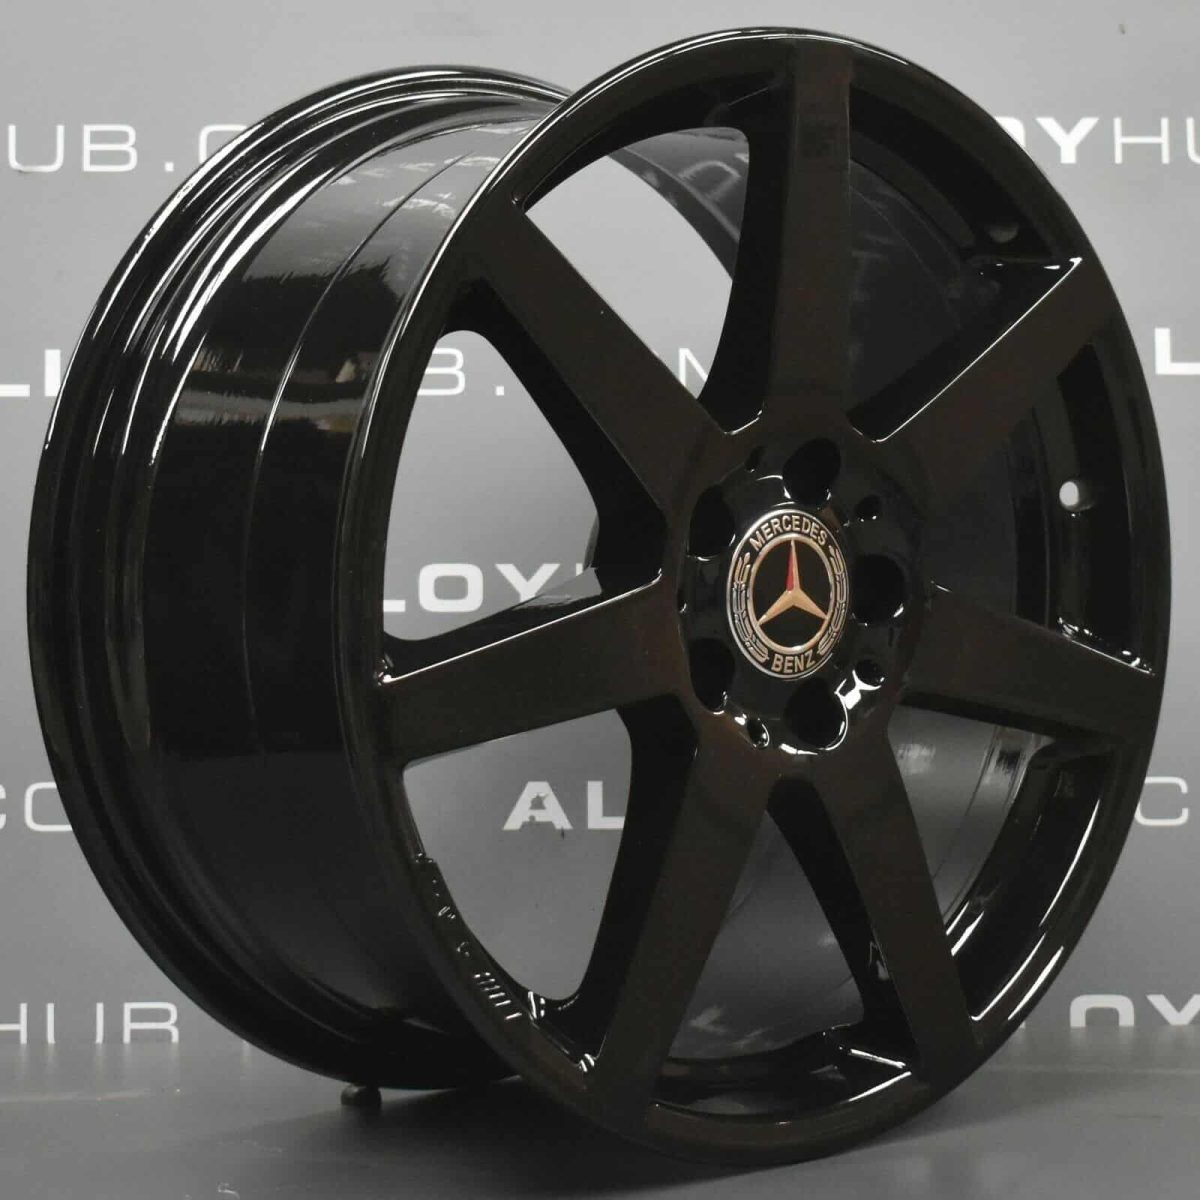 Genuine Mercedes-Benz C-Class AMG W204 7 Spoke 18" inch Alloy Wheels with Gloss Black Finish A2044019802 A2044019902